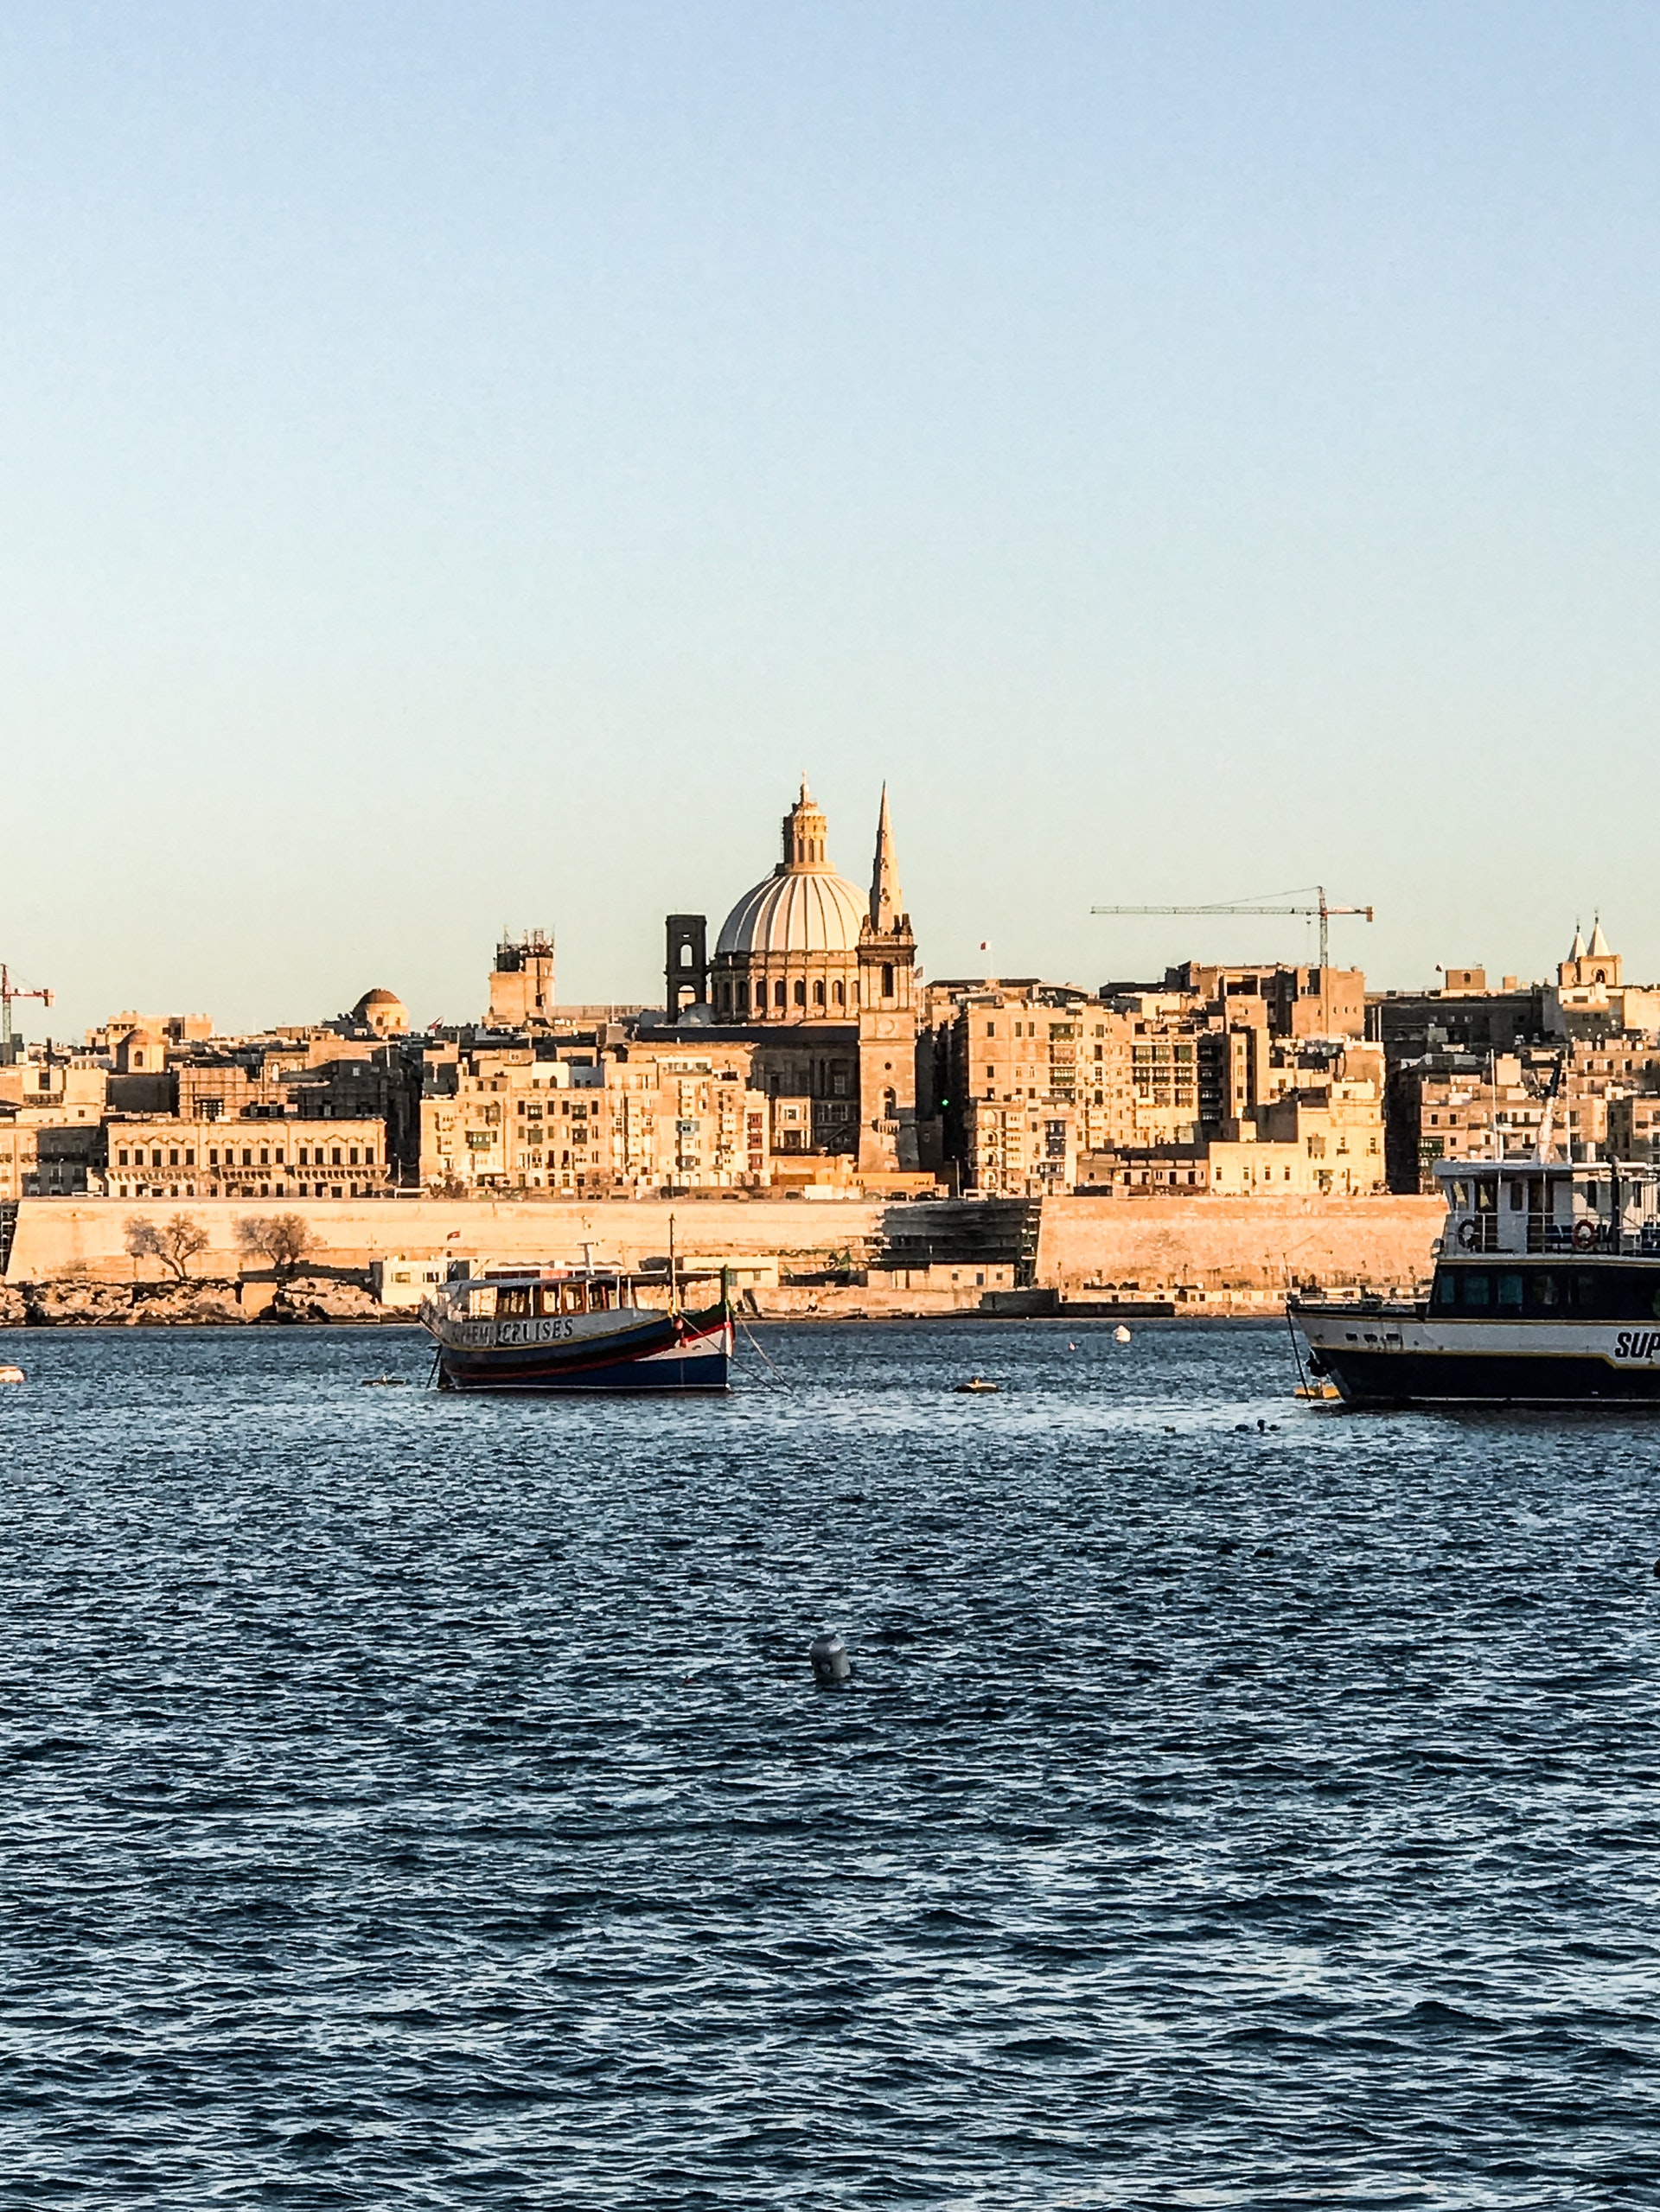 Two ships on the water in front of the beautiful architecture of Valletta, Malta; image by Ines Bahr, via Pexels.com.